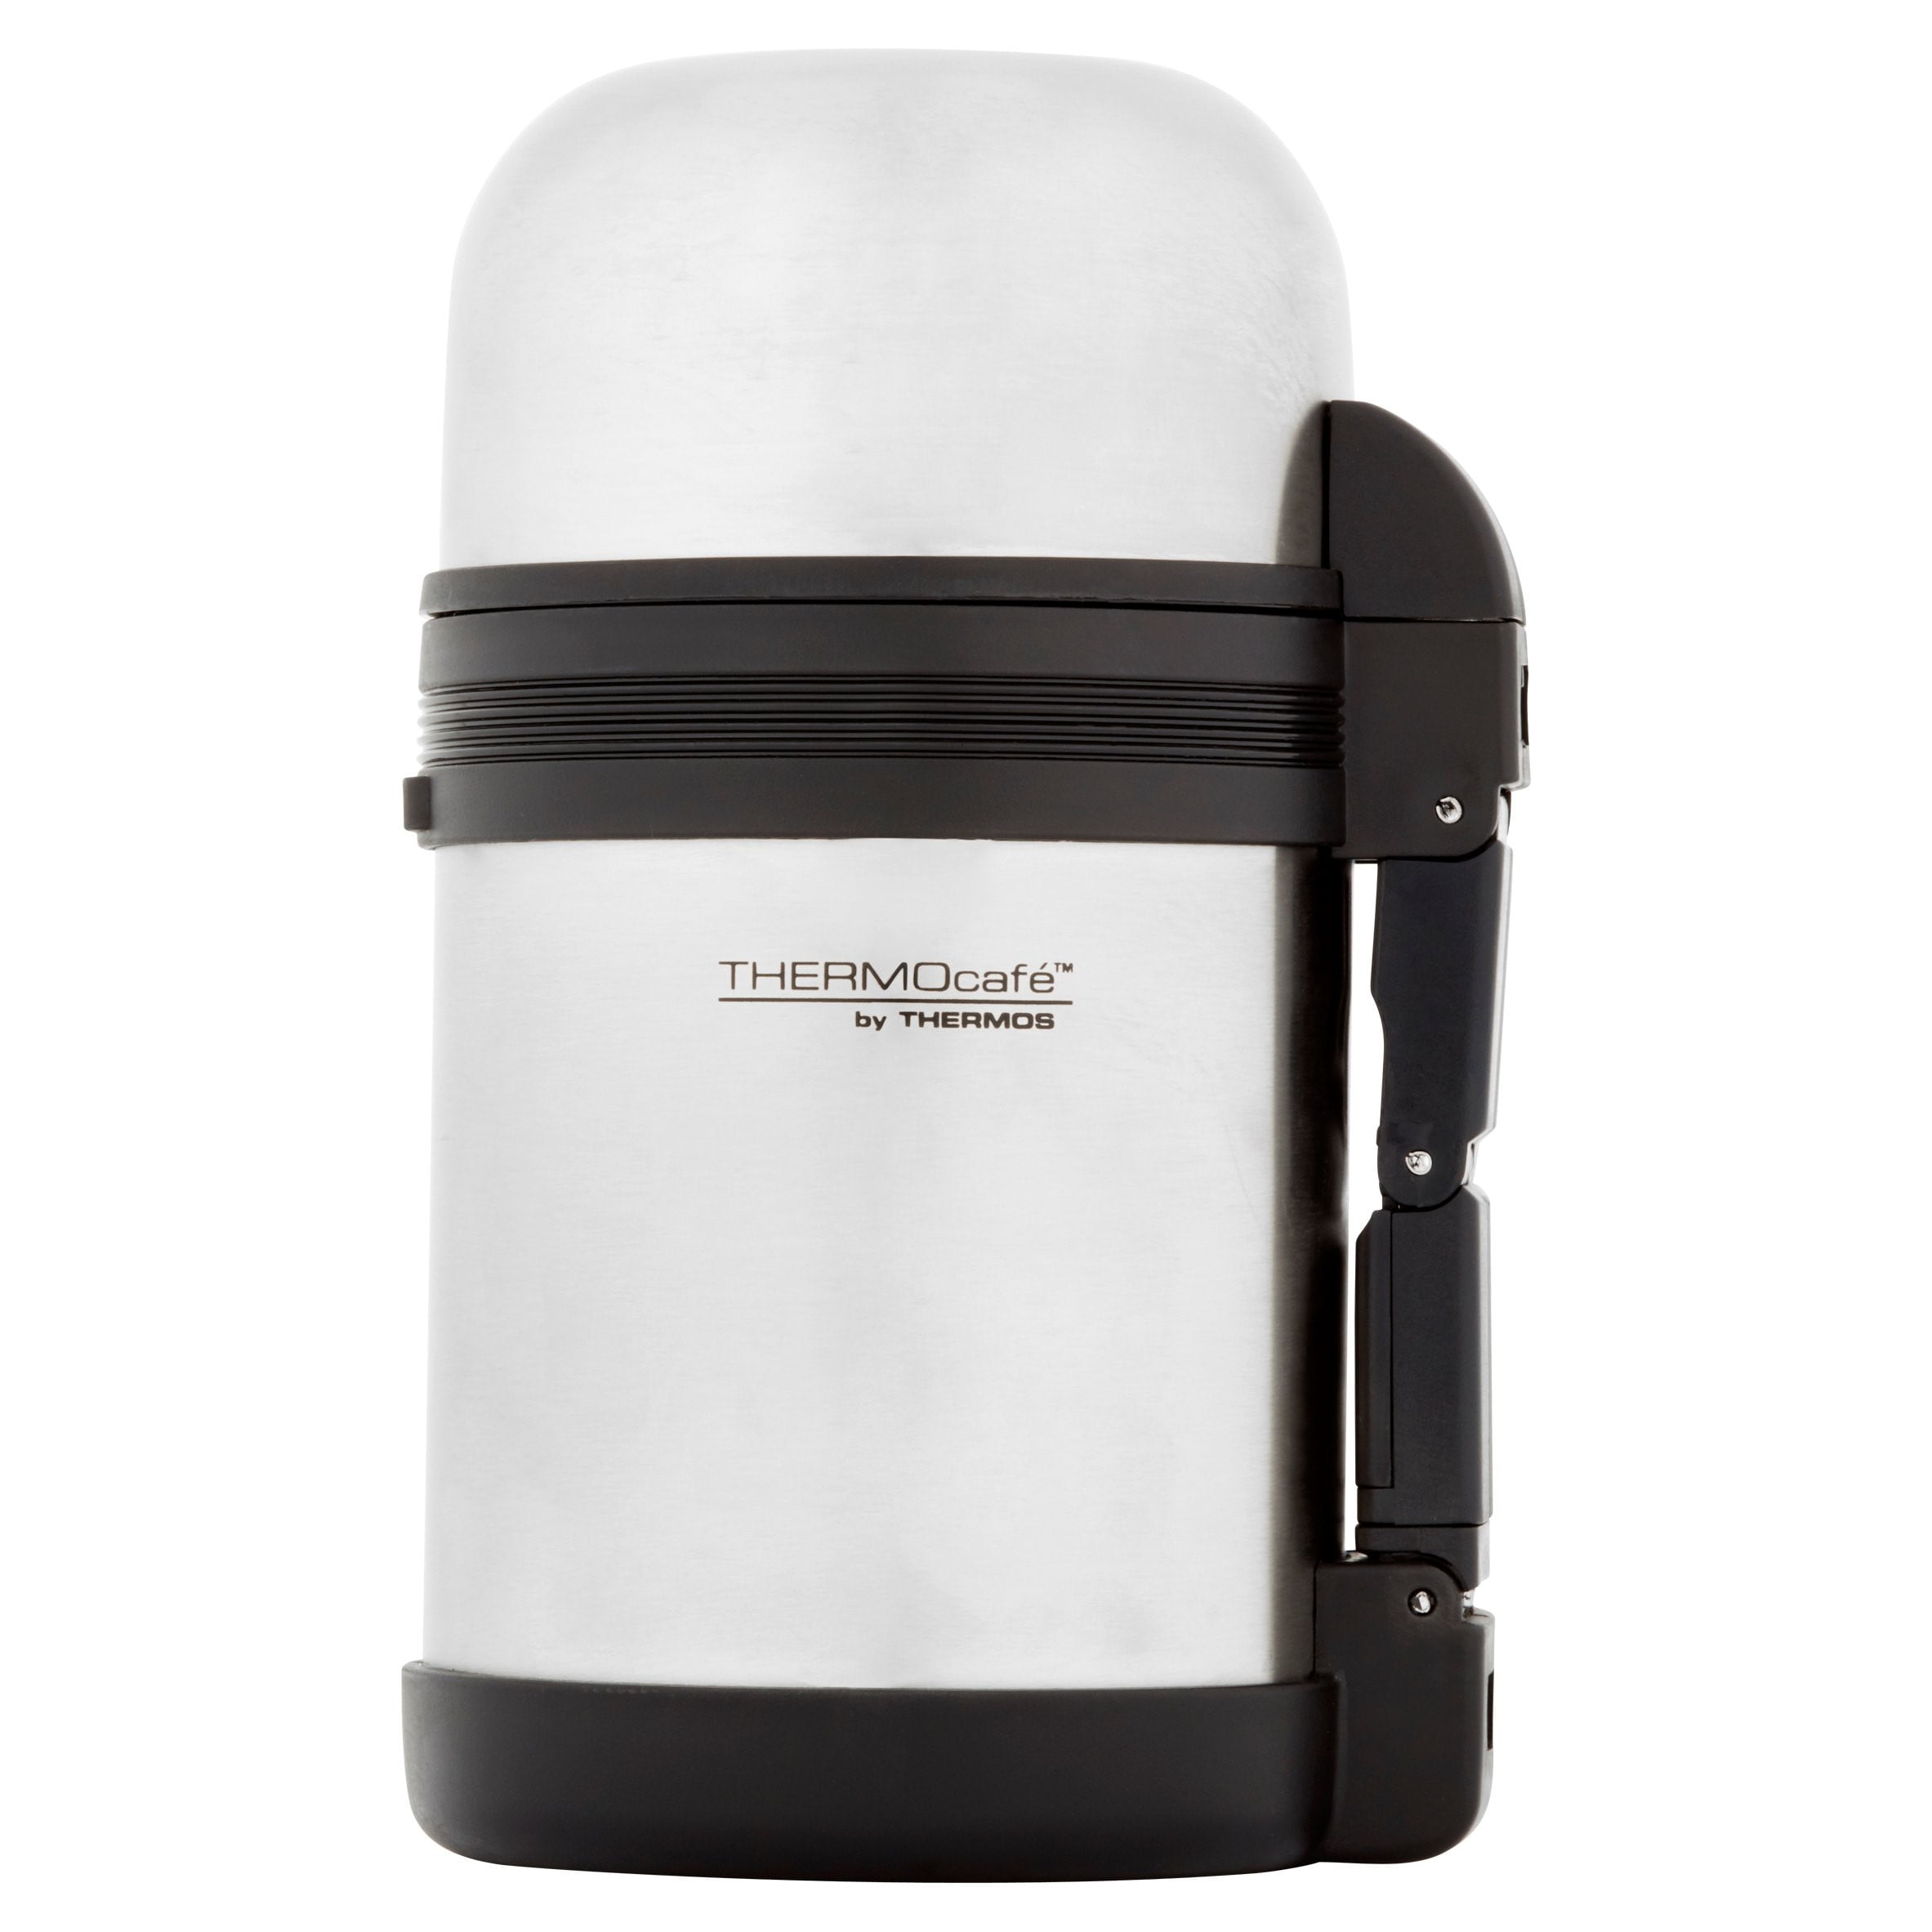 Thermos TGU1900SC6 Stainless 64 Oz. Vacuum Insulated Brew-In